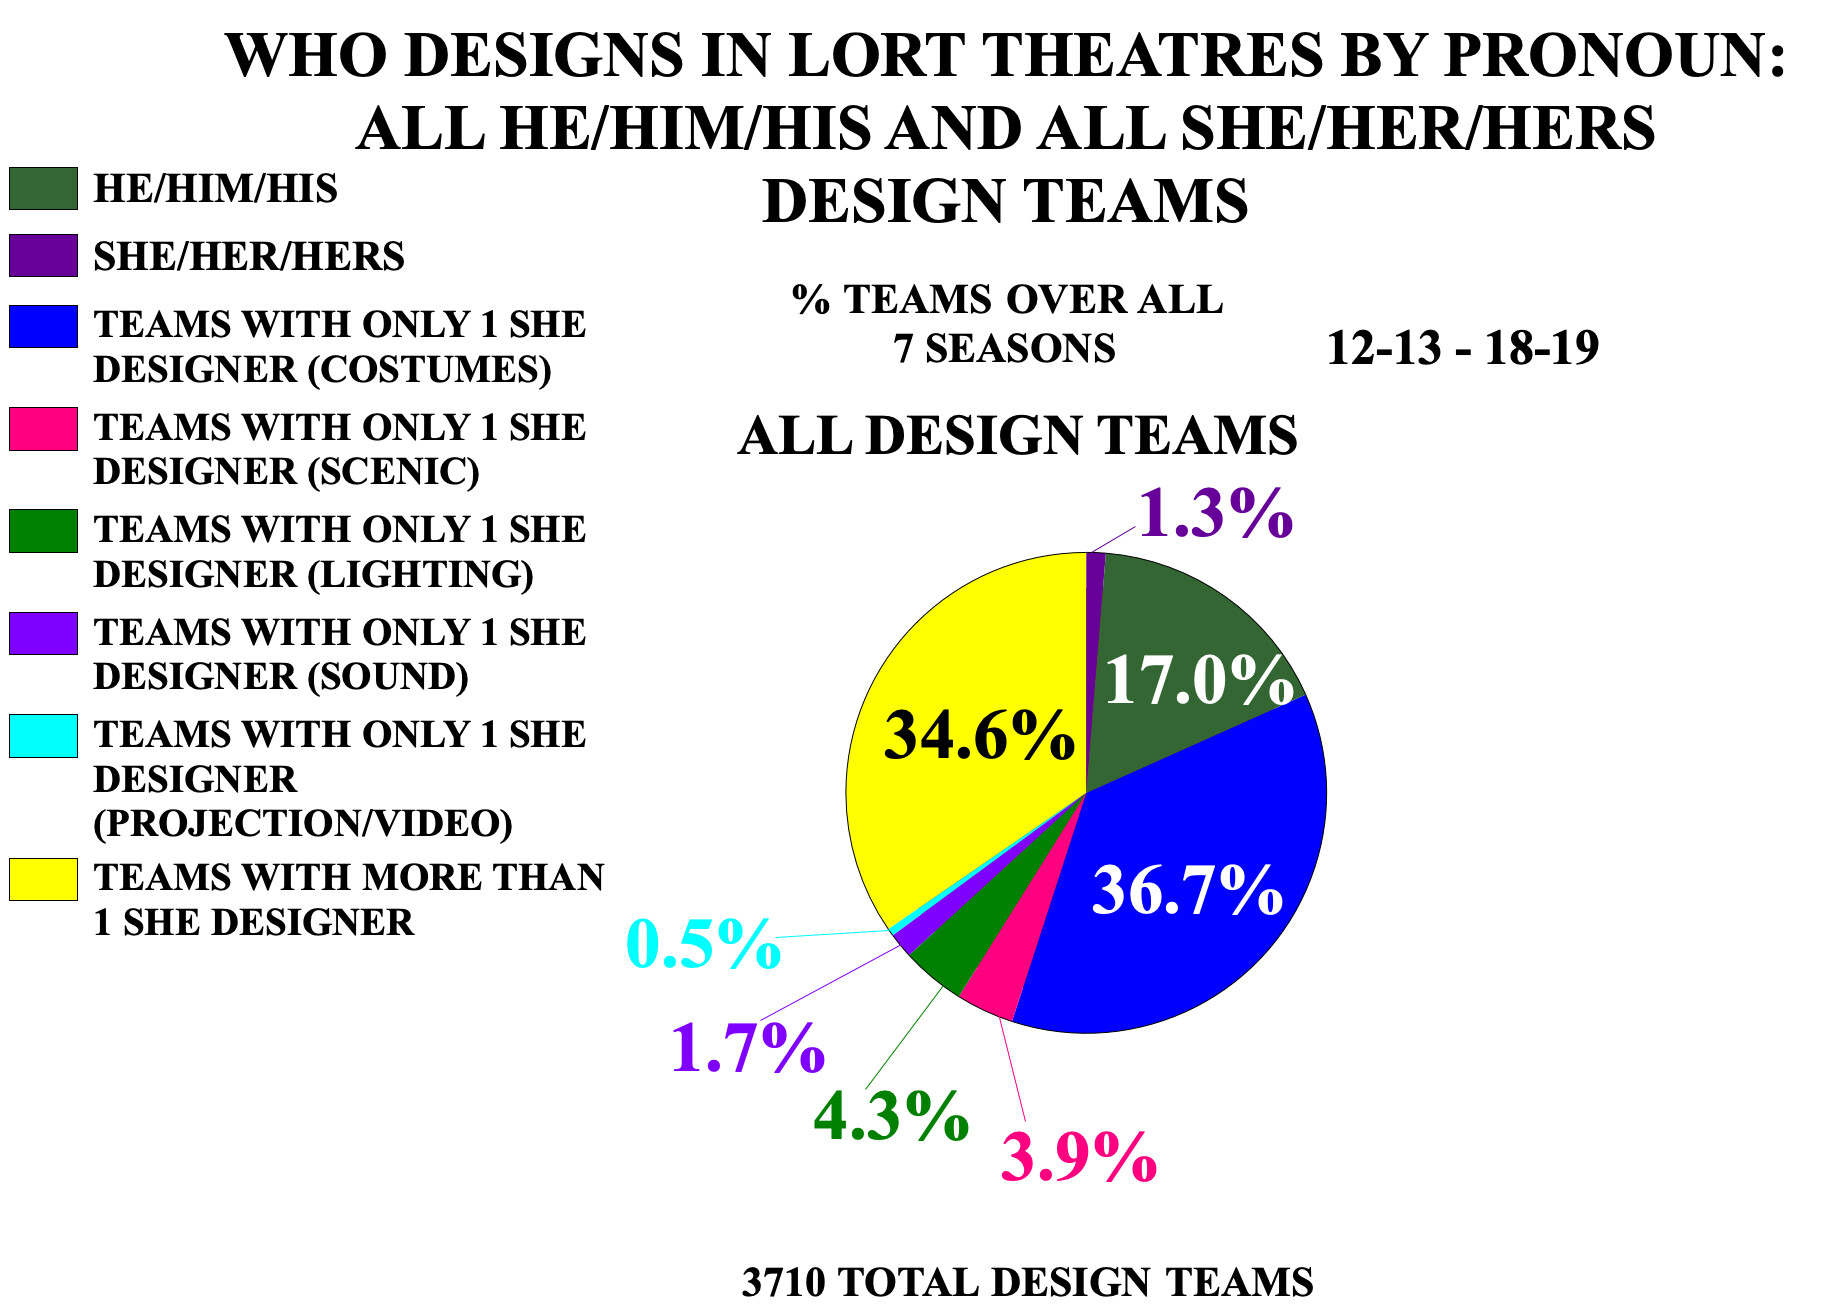 Who Designs in LORT Theatres by Pronoun: All He/Him/His and All She/Her/ Hers Design Teams